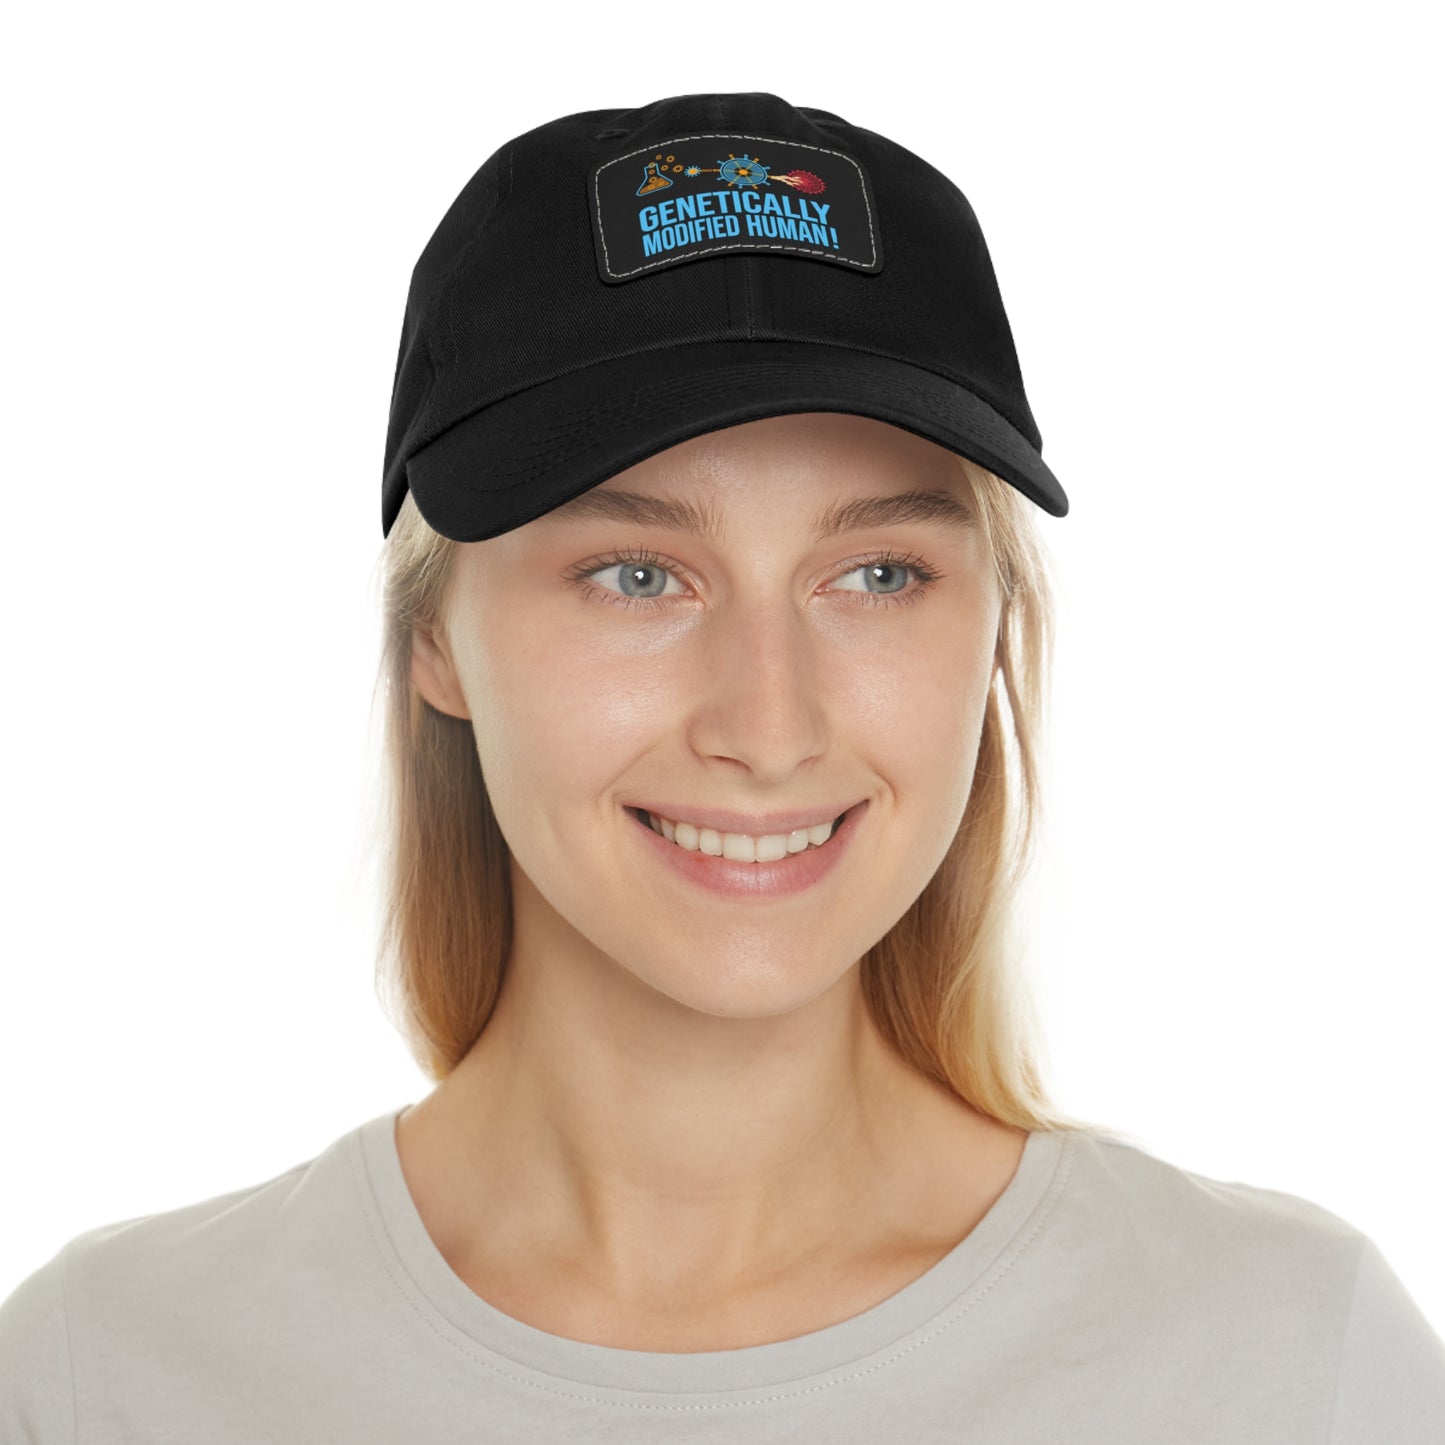 Genetically modified Human 2 Dad Hat with Leather Patch (Rectangle)